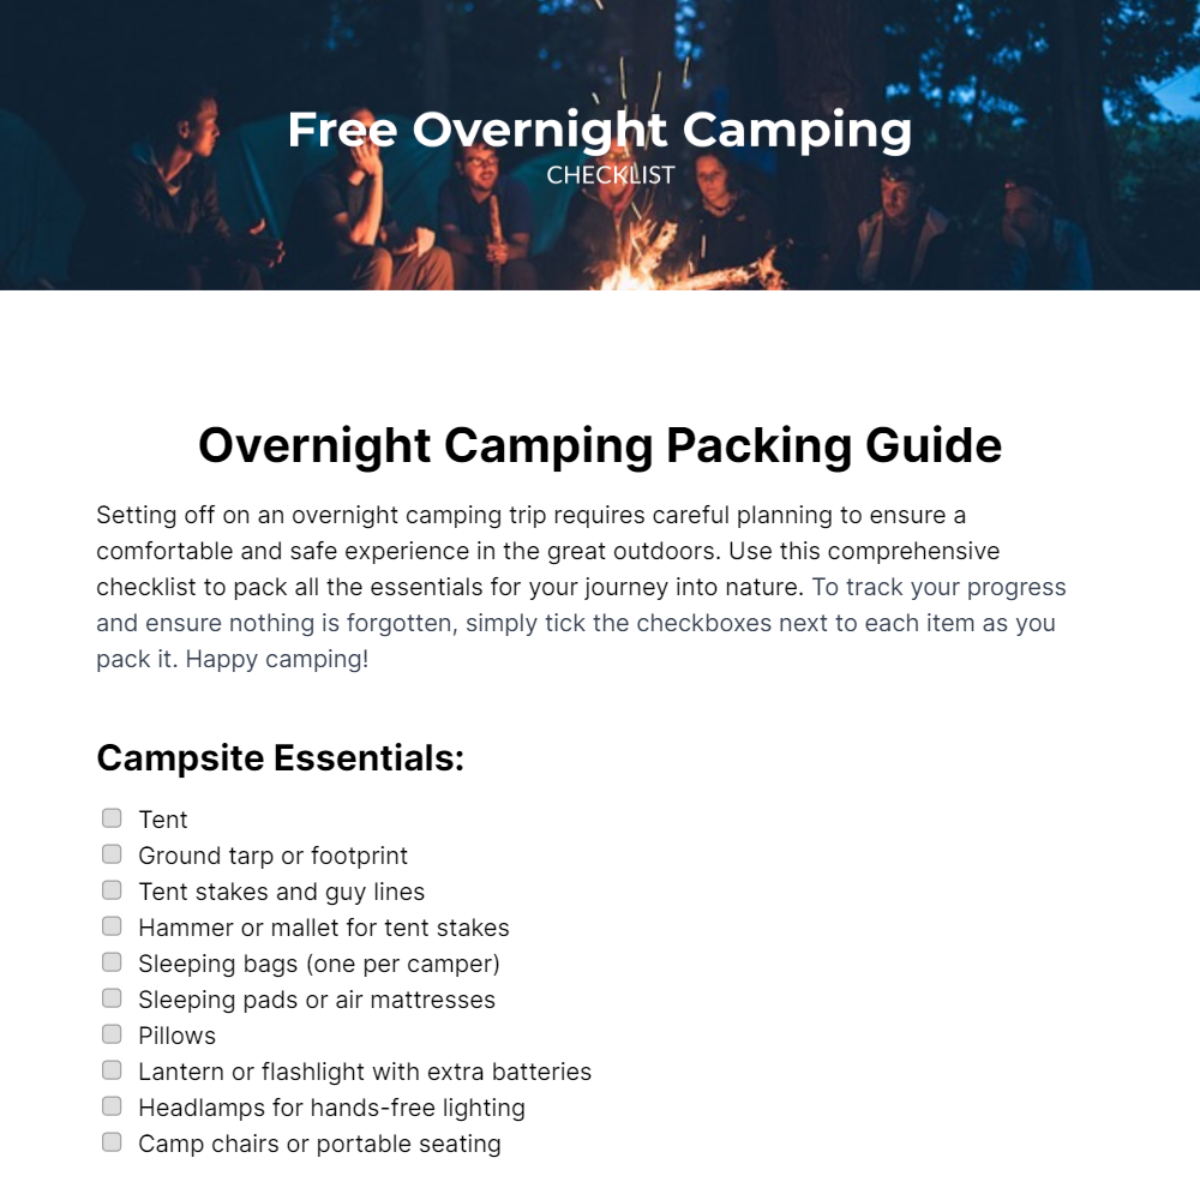 Free Overnight Camping Checklist Template